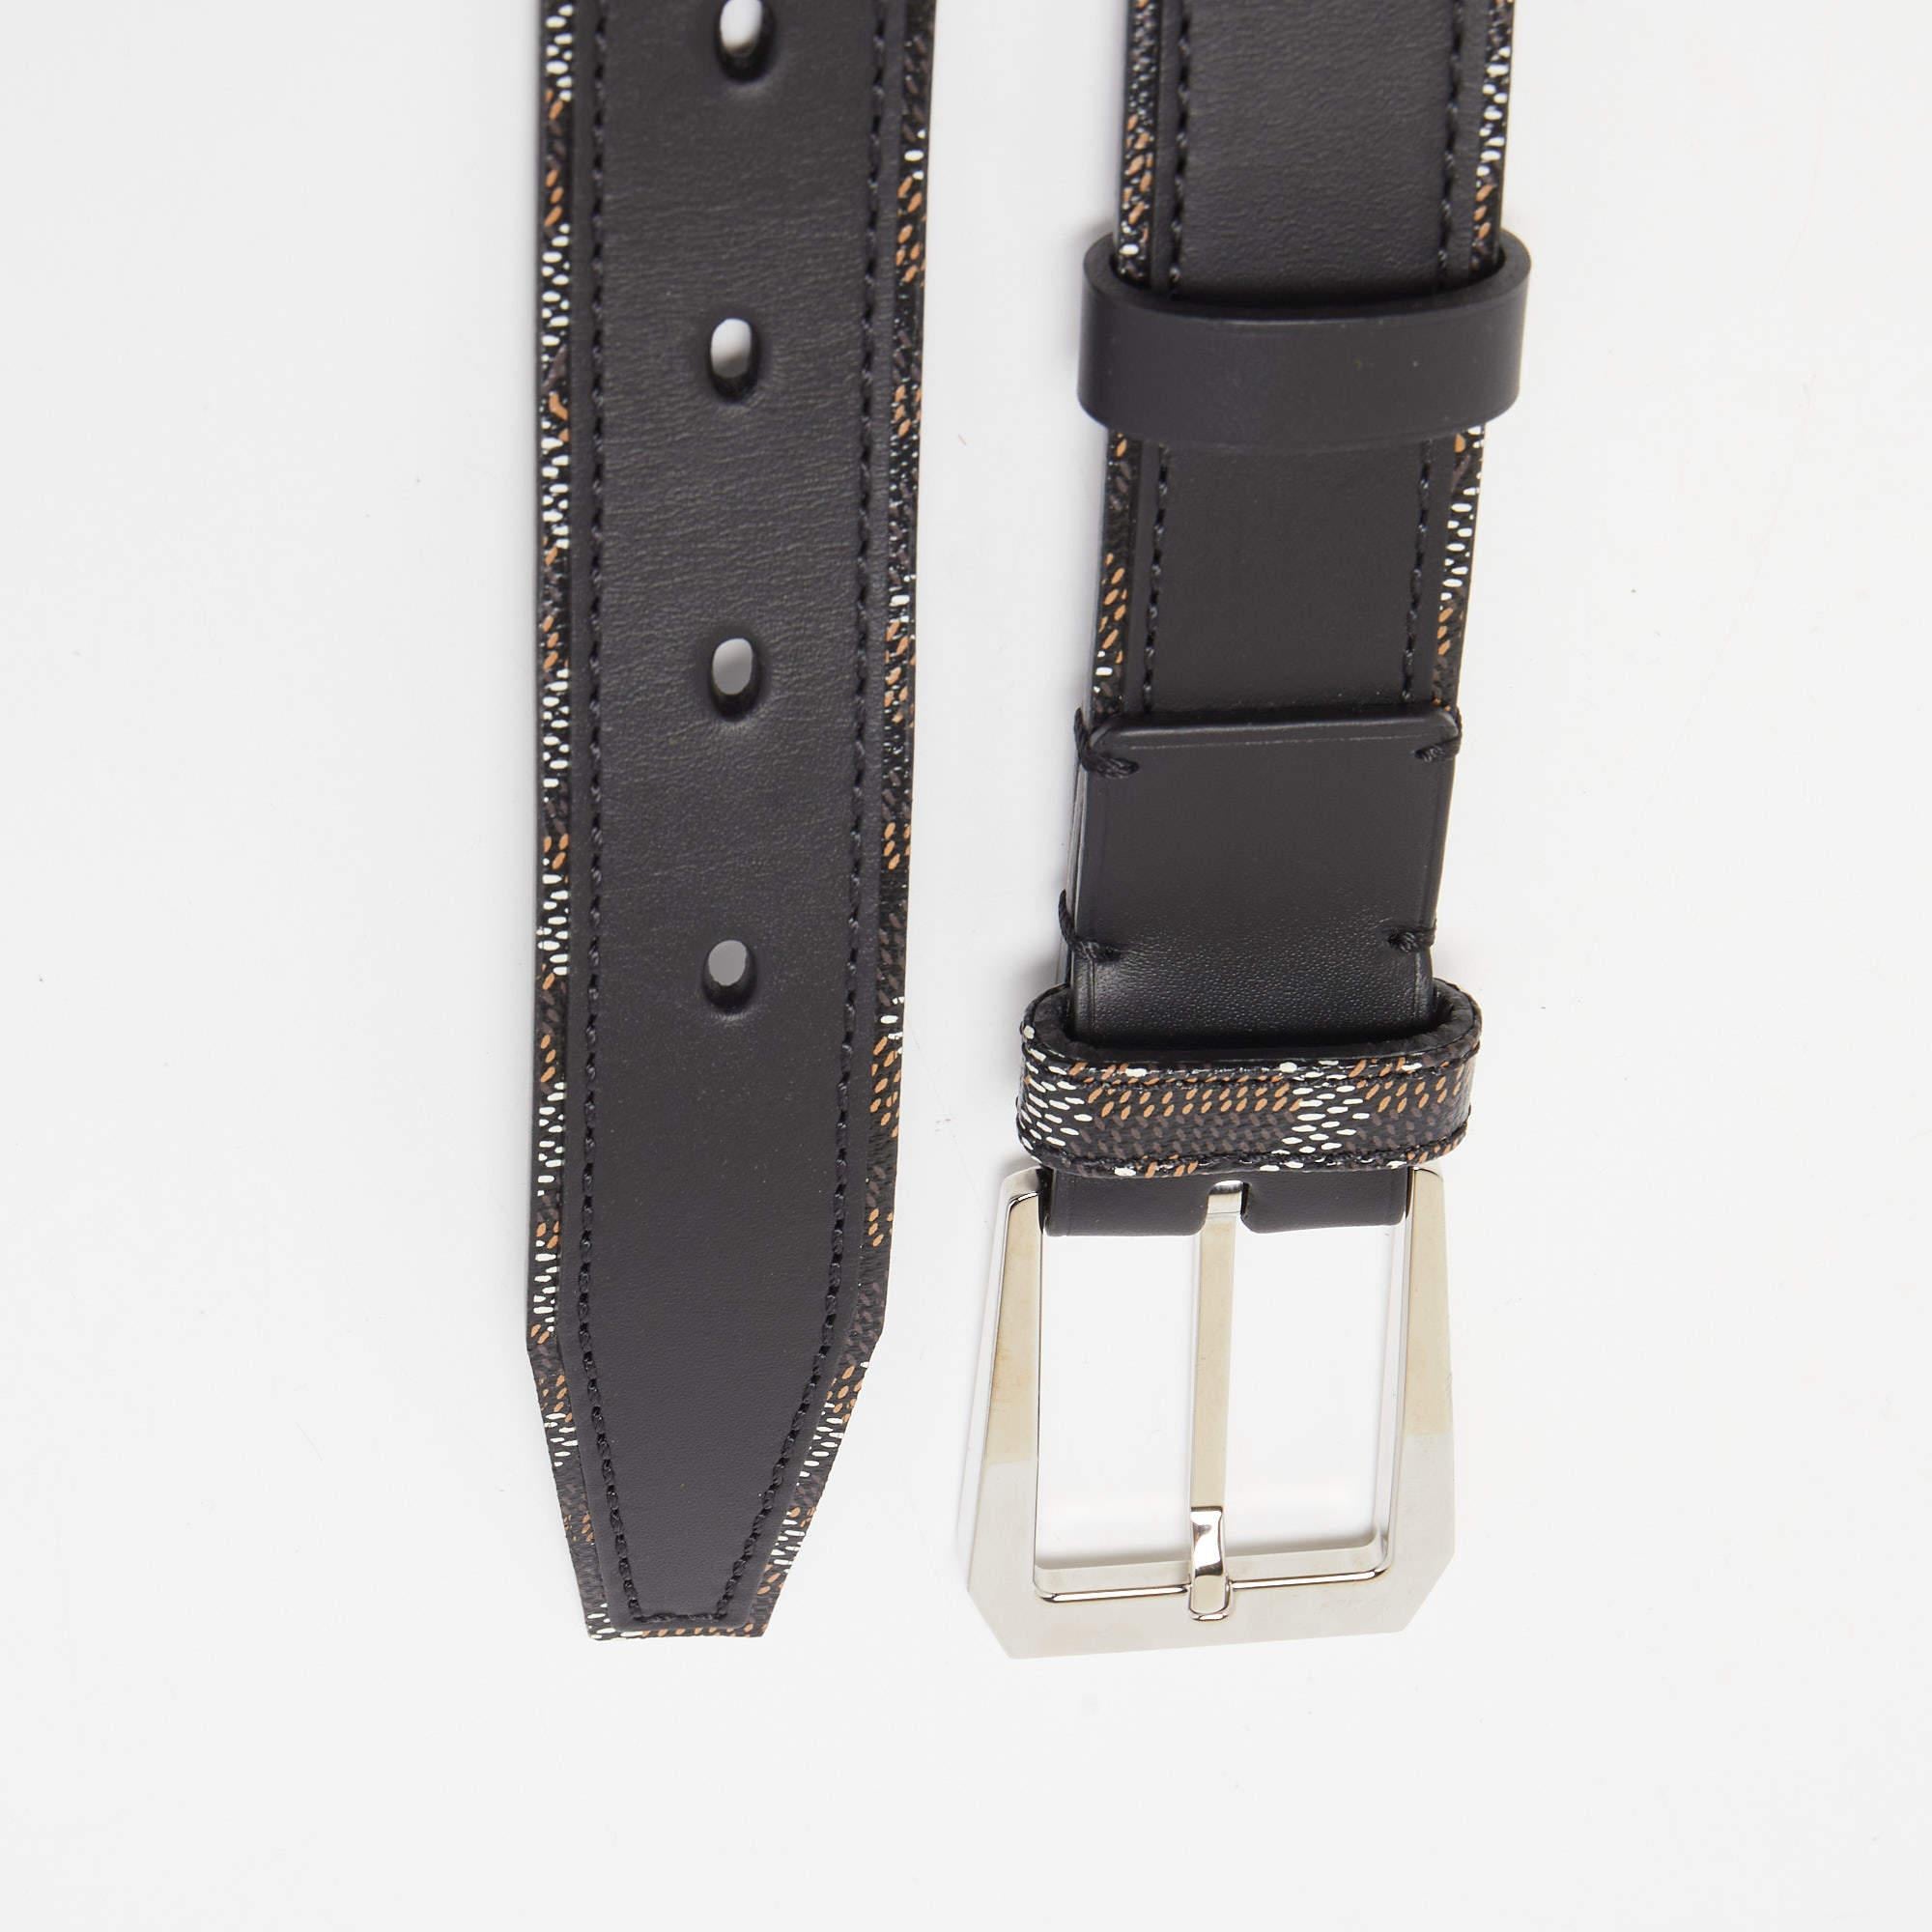 This chic and classy belt from Goyard will be an amazing buy! It is crafted from the signature Goyardine canvas with leather and styled with a silver-tone pin buckle and two loops that seamlessly fasten the belt.

Includes: Original Dustbag,